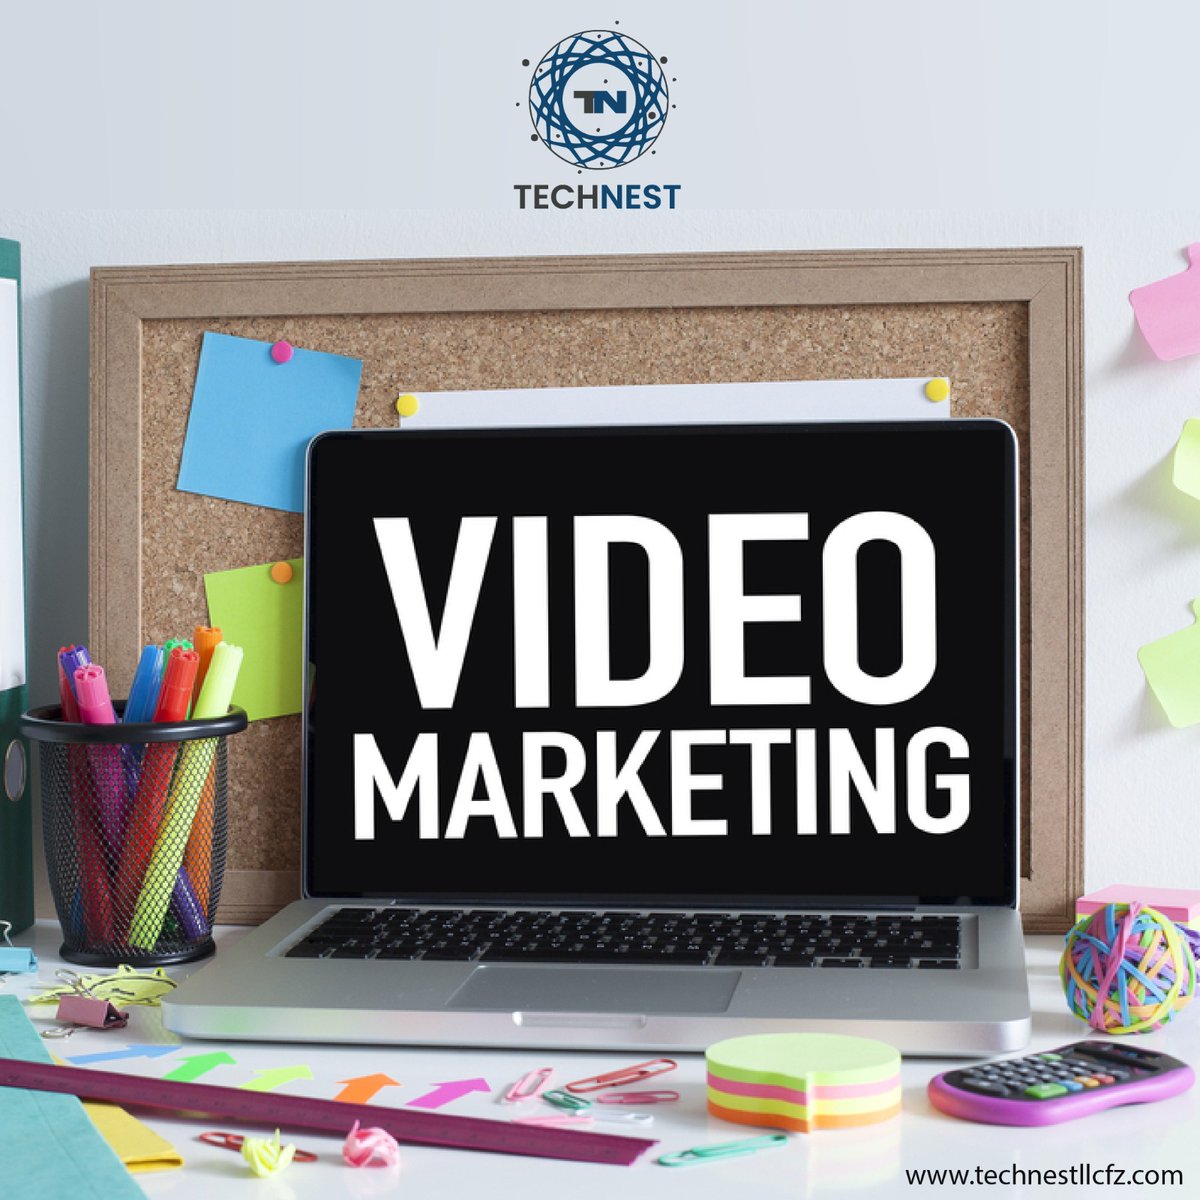 Unlock the power of video marketing and captivate your audience with compelling visuals and engaging storytelling. Discover the impact of video in reaching your marketing goals and leaving a lasting impression. 🎥✨
.
.
#videomarketing #technestllcfz #VisualStorytelling